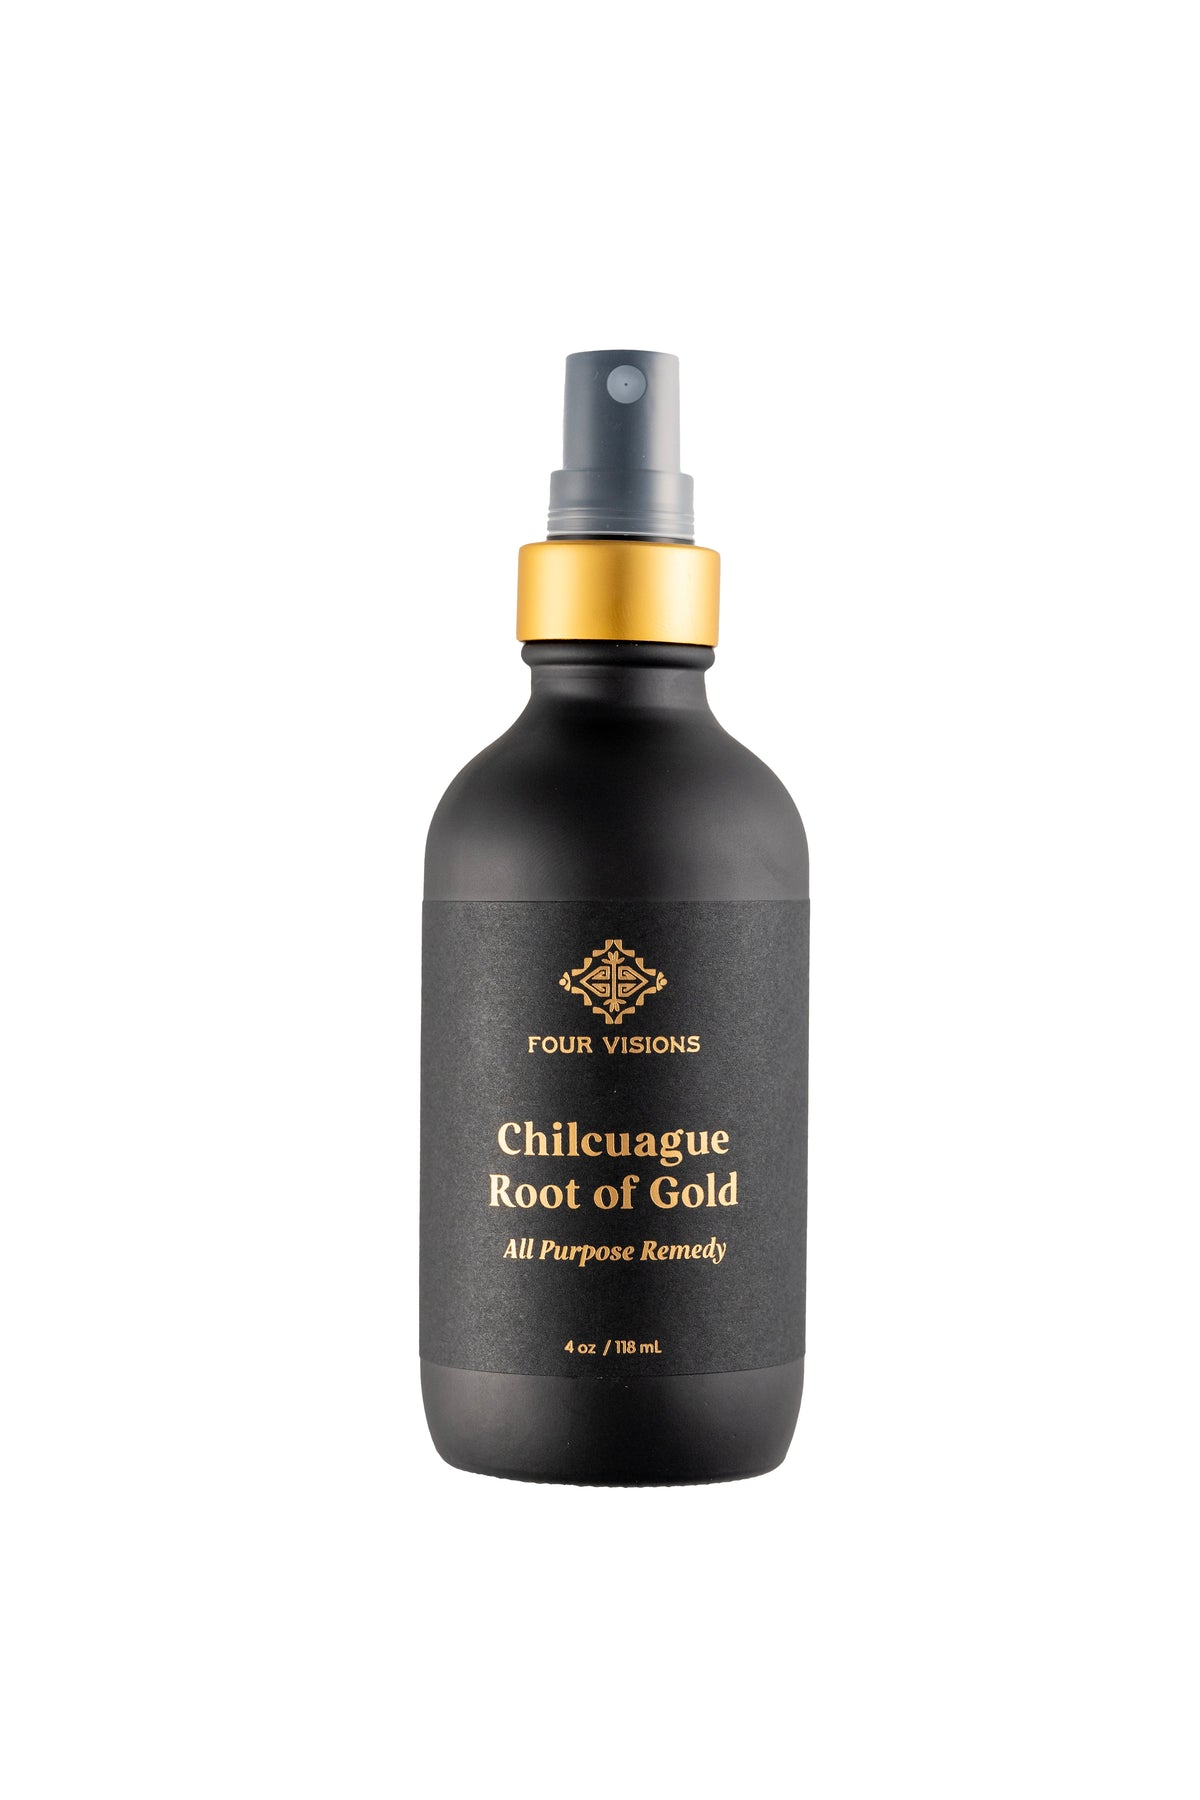 Chilcuague Root of Gold Healing Spray